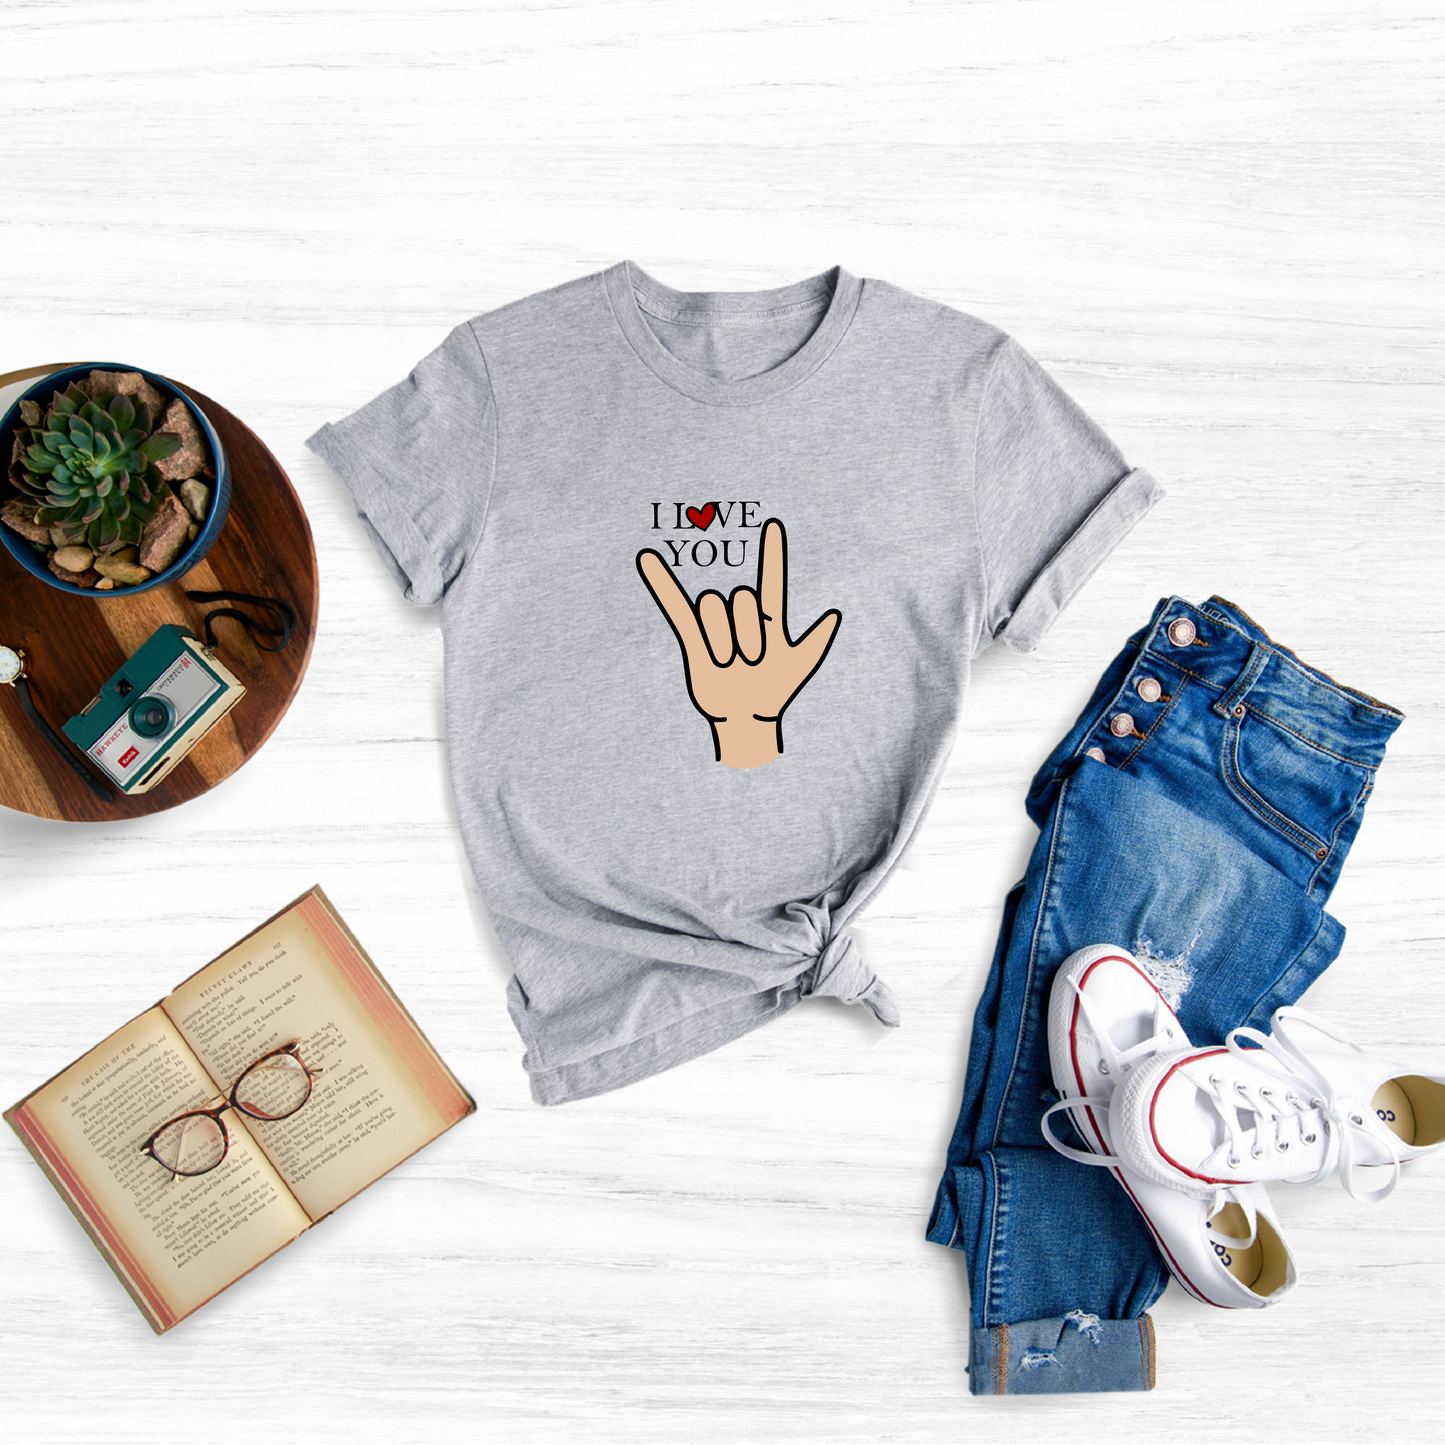 Grab this adorable I Love You T-Shirt and let everyone know you care.